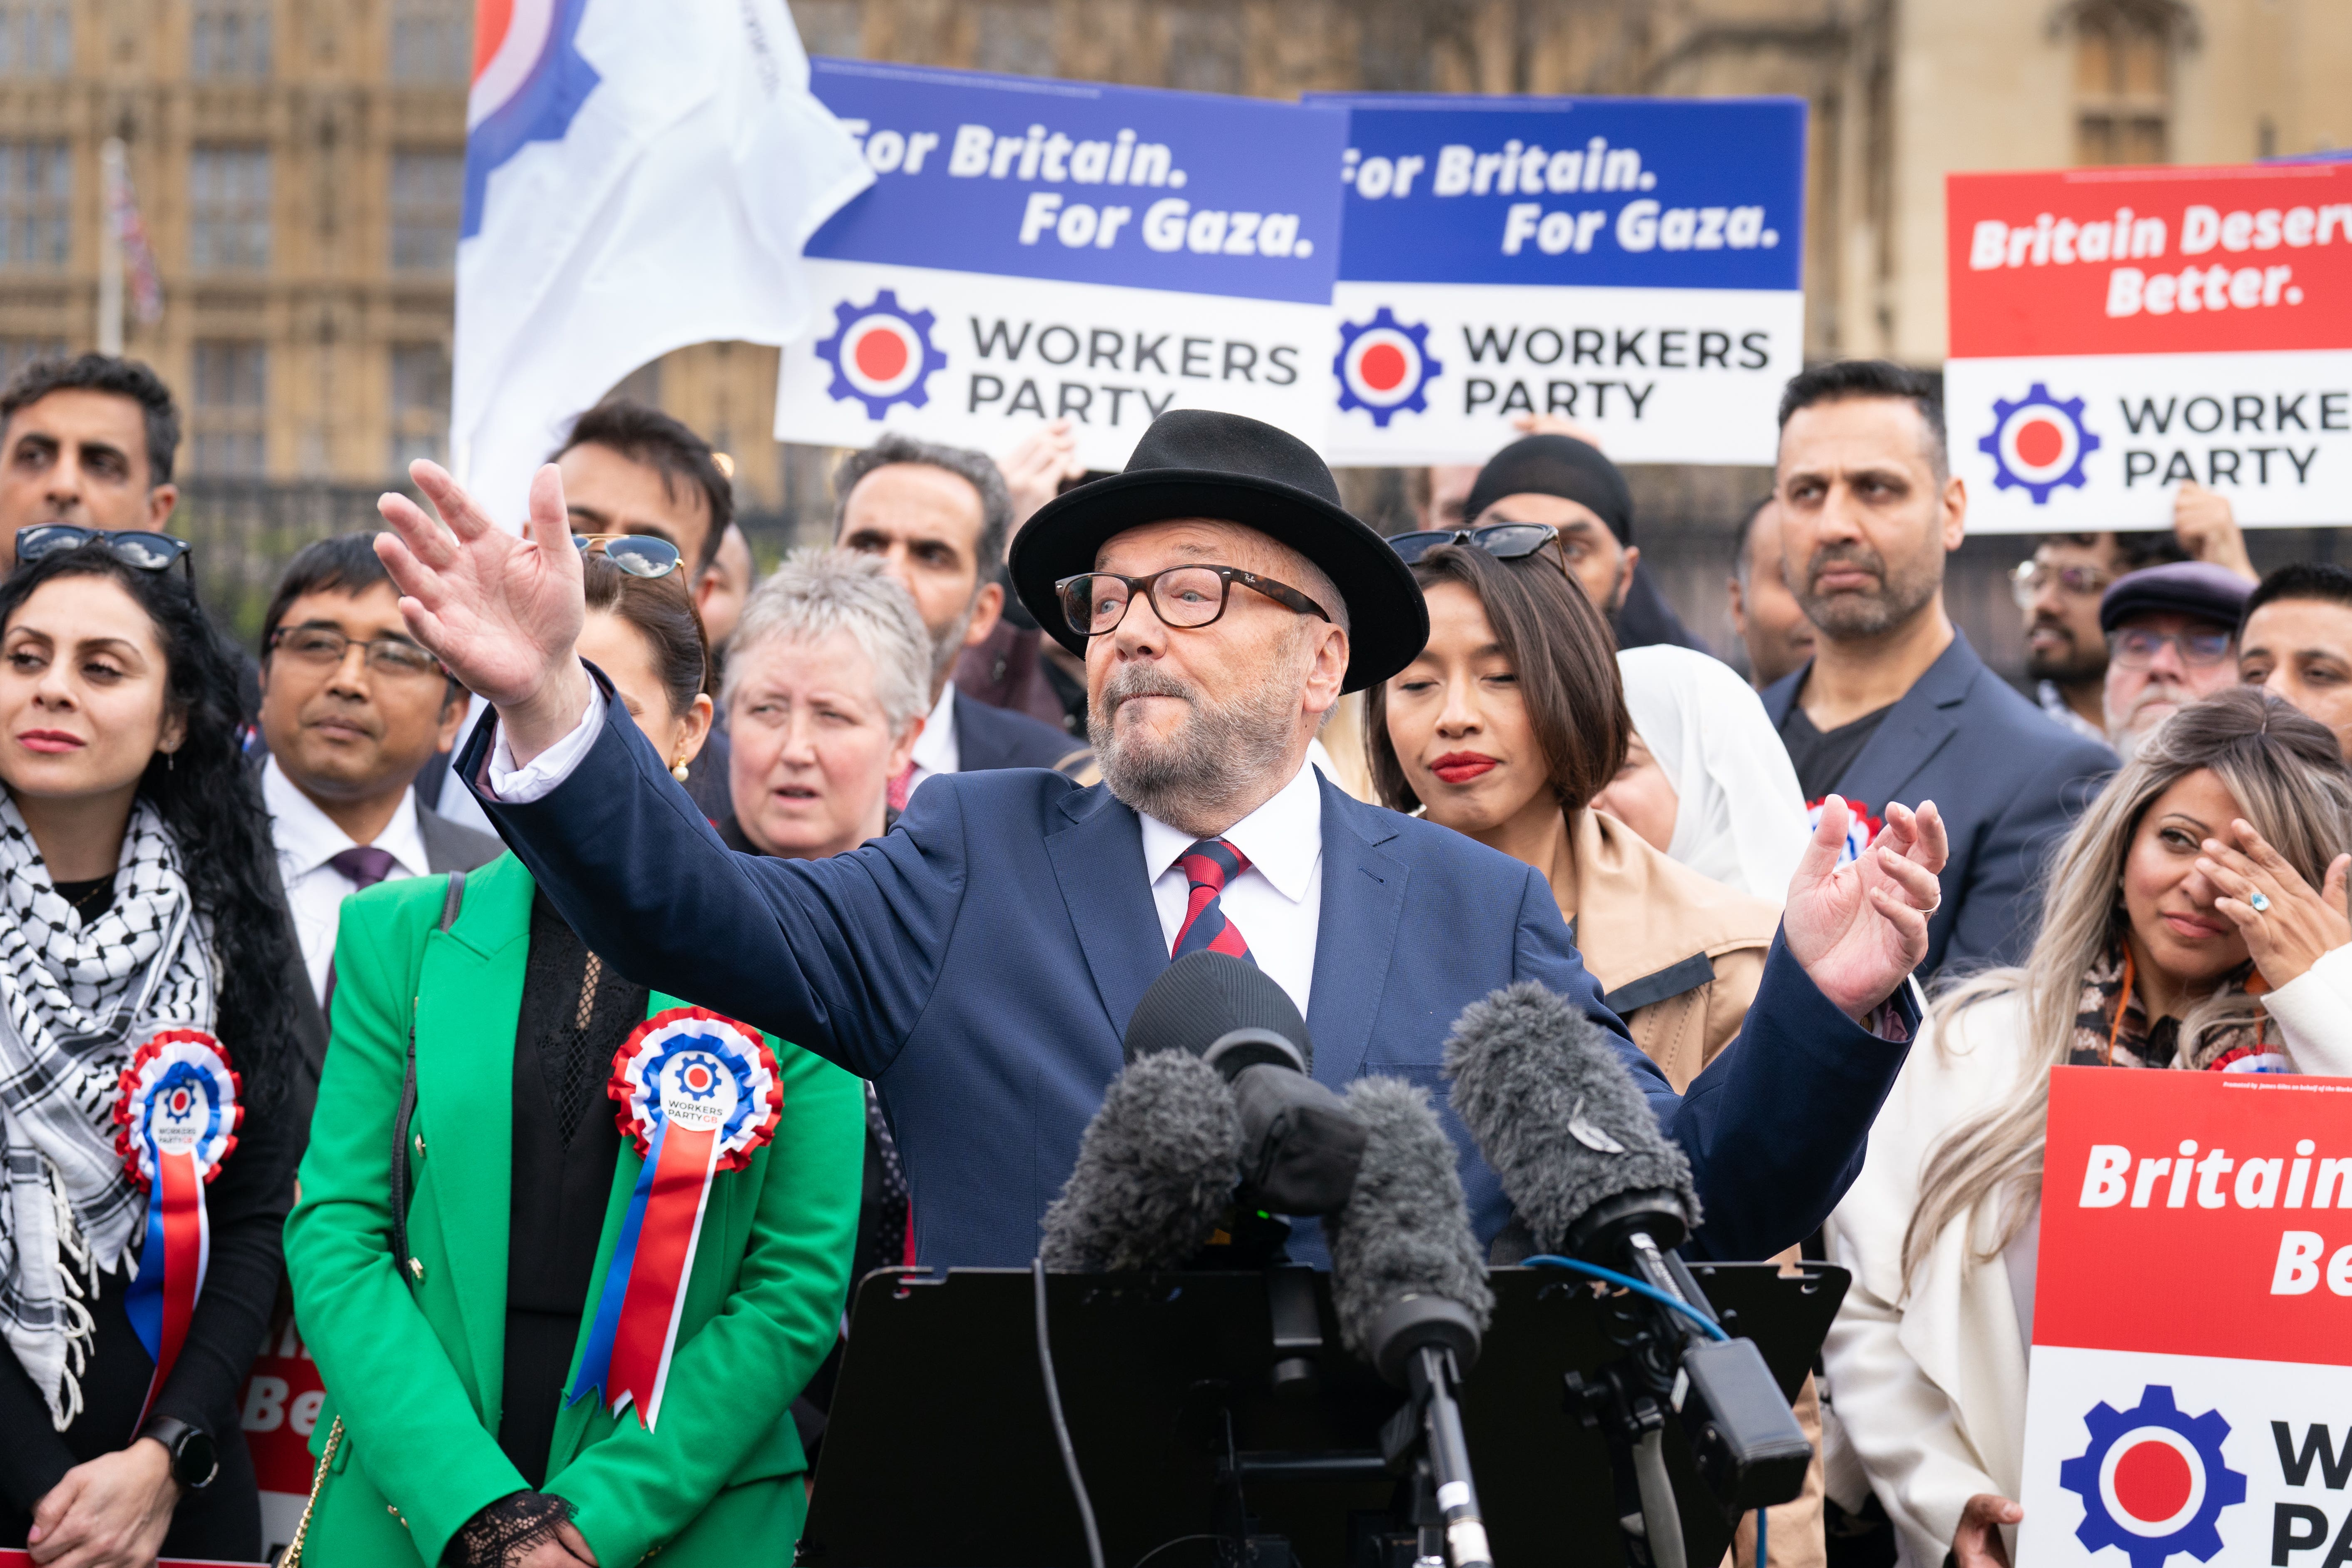 George Galloway during a press conference in central London in April, where he announced the Workers Party’s intention to contest every seat in Great Britain at the upcoming election (Stefan Rousseau/PA)